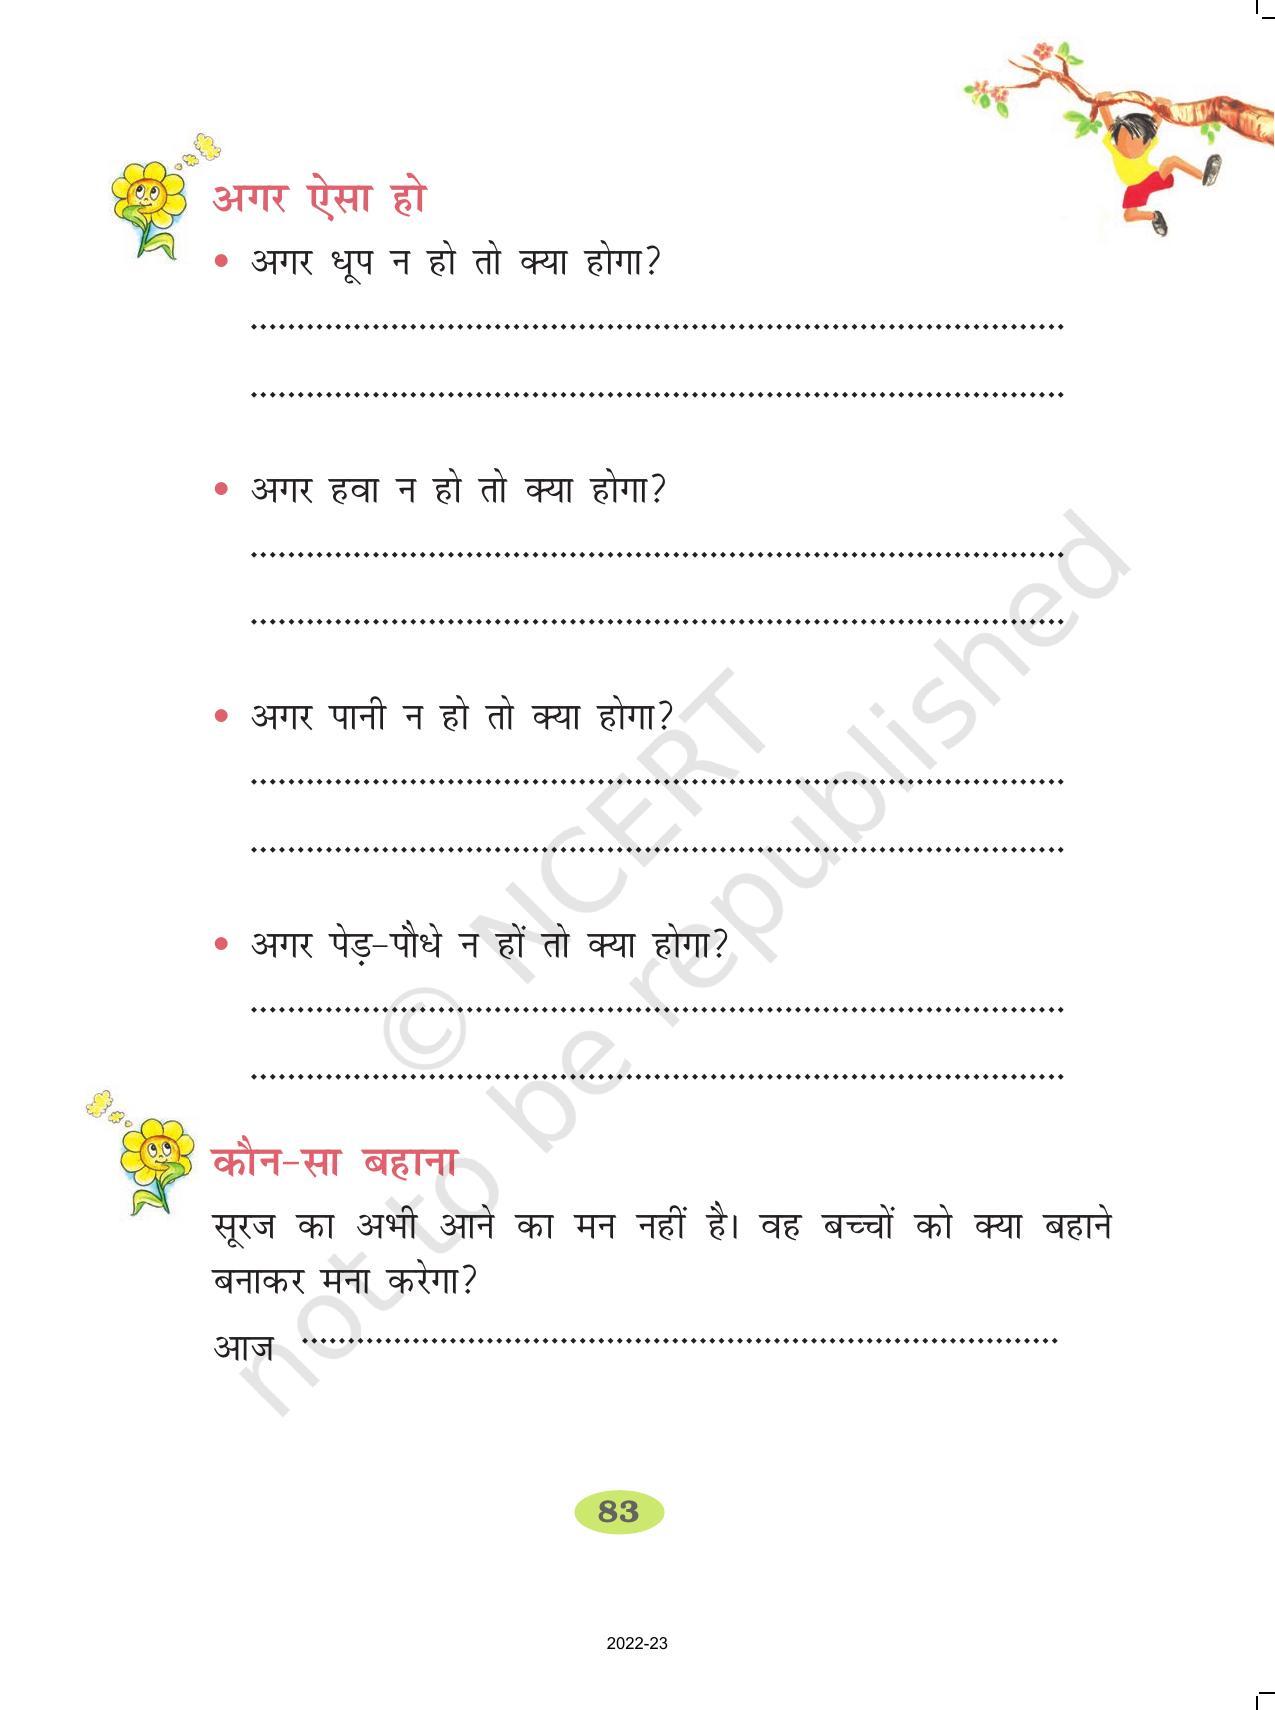 NCERT Book for Class 2 Hindi :Chapter 13-सूरज जल्दी आना जी - Page 3